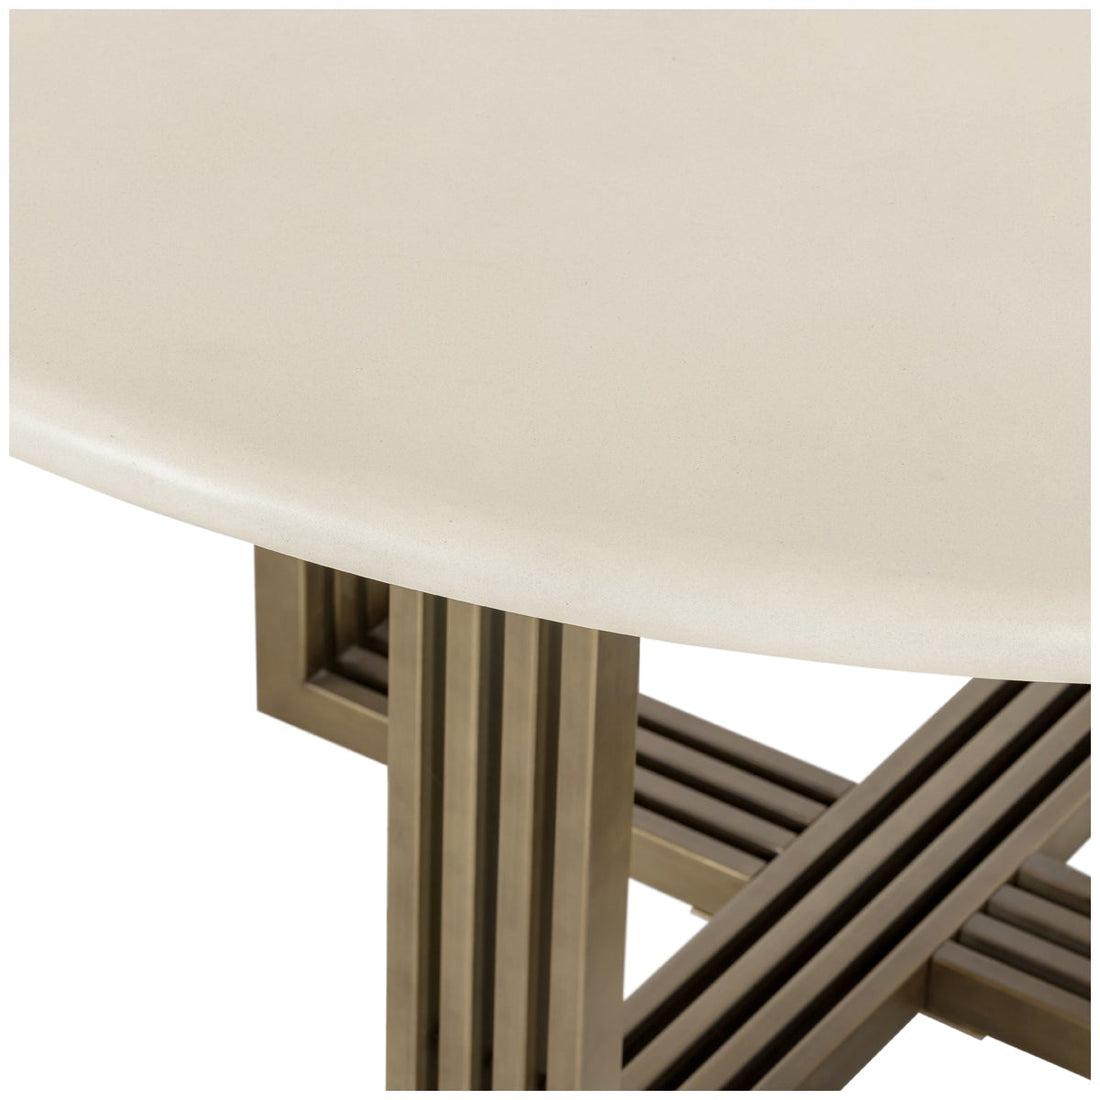 Four Hands Everett Mia Round Dining Table - Parchment White